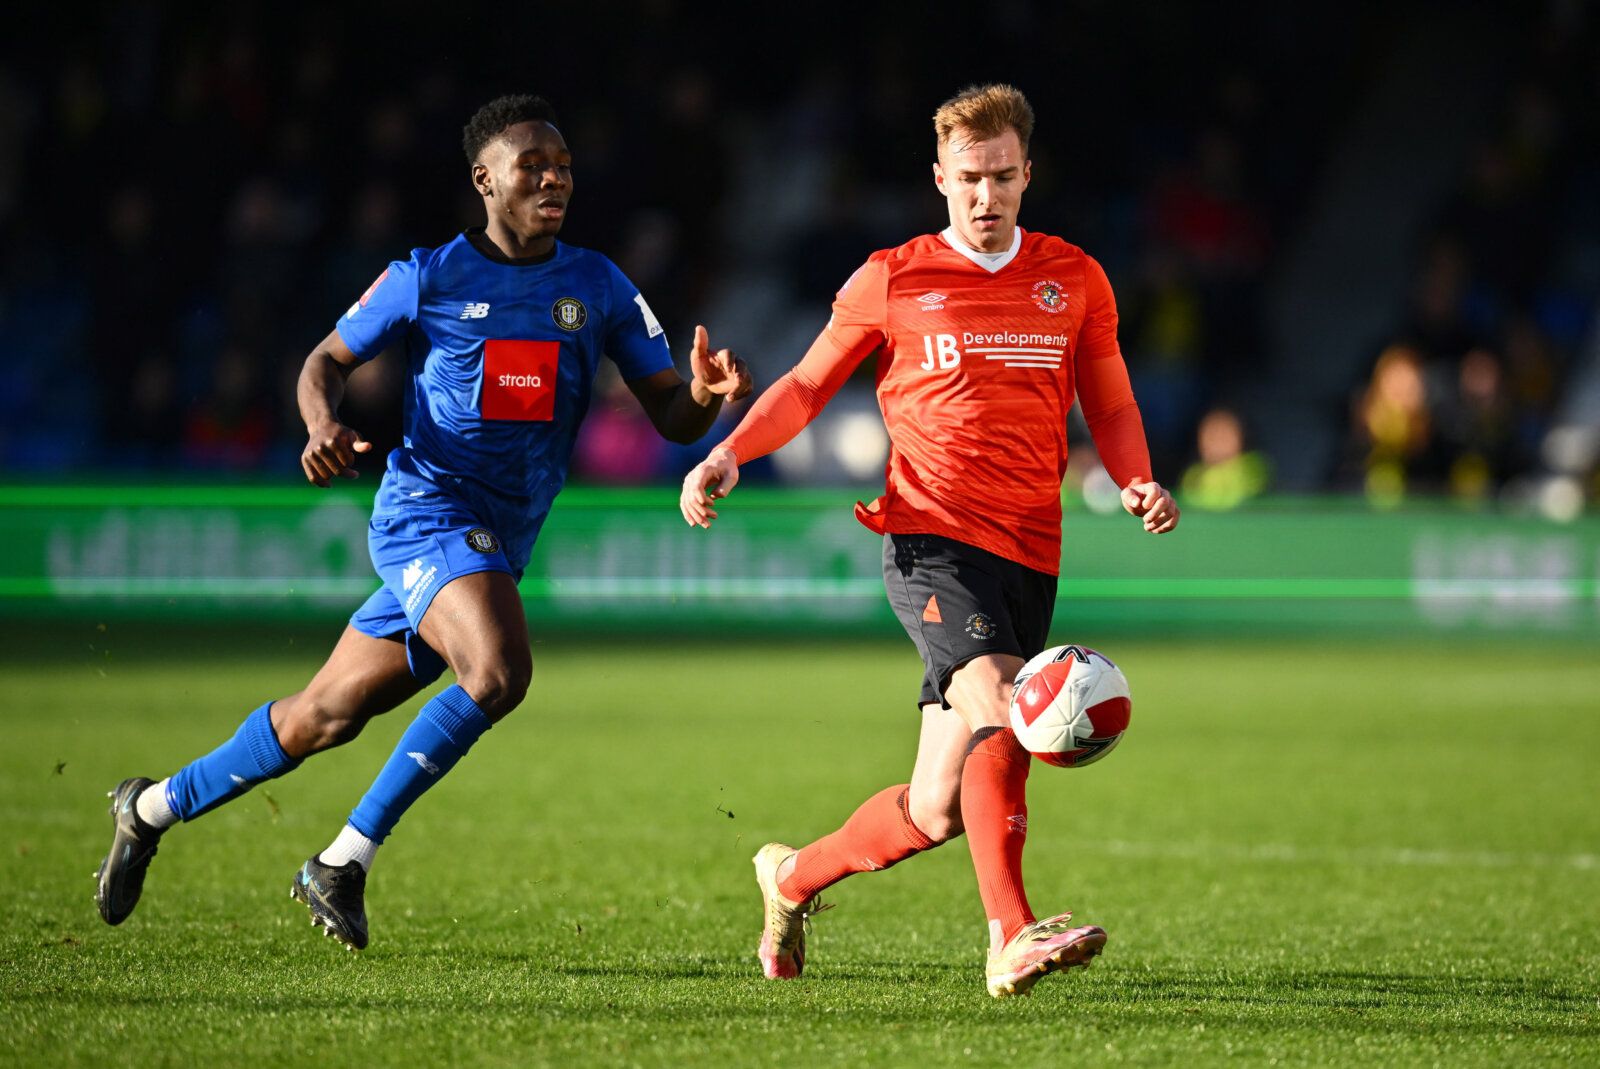 Soccer Football - FA Cup Third Round - Luton Town v Harrogate Town - Kenilworth Road, Luton, Britain - January 9, 2022 Harrogate Town's Brahima Diarra in action with Luton Town's James Bree REUTERS/Dylan Martinez